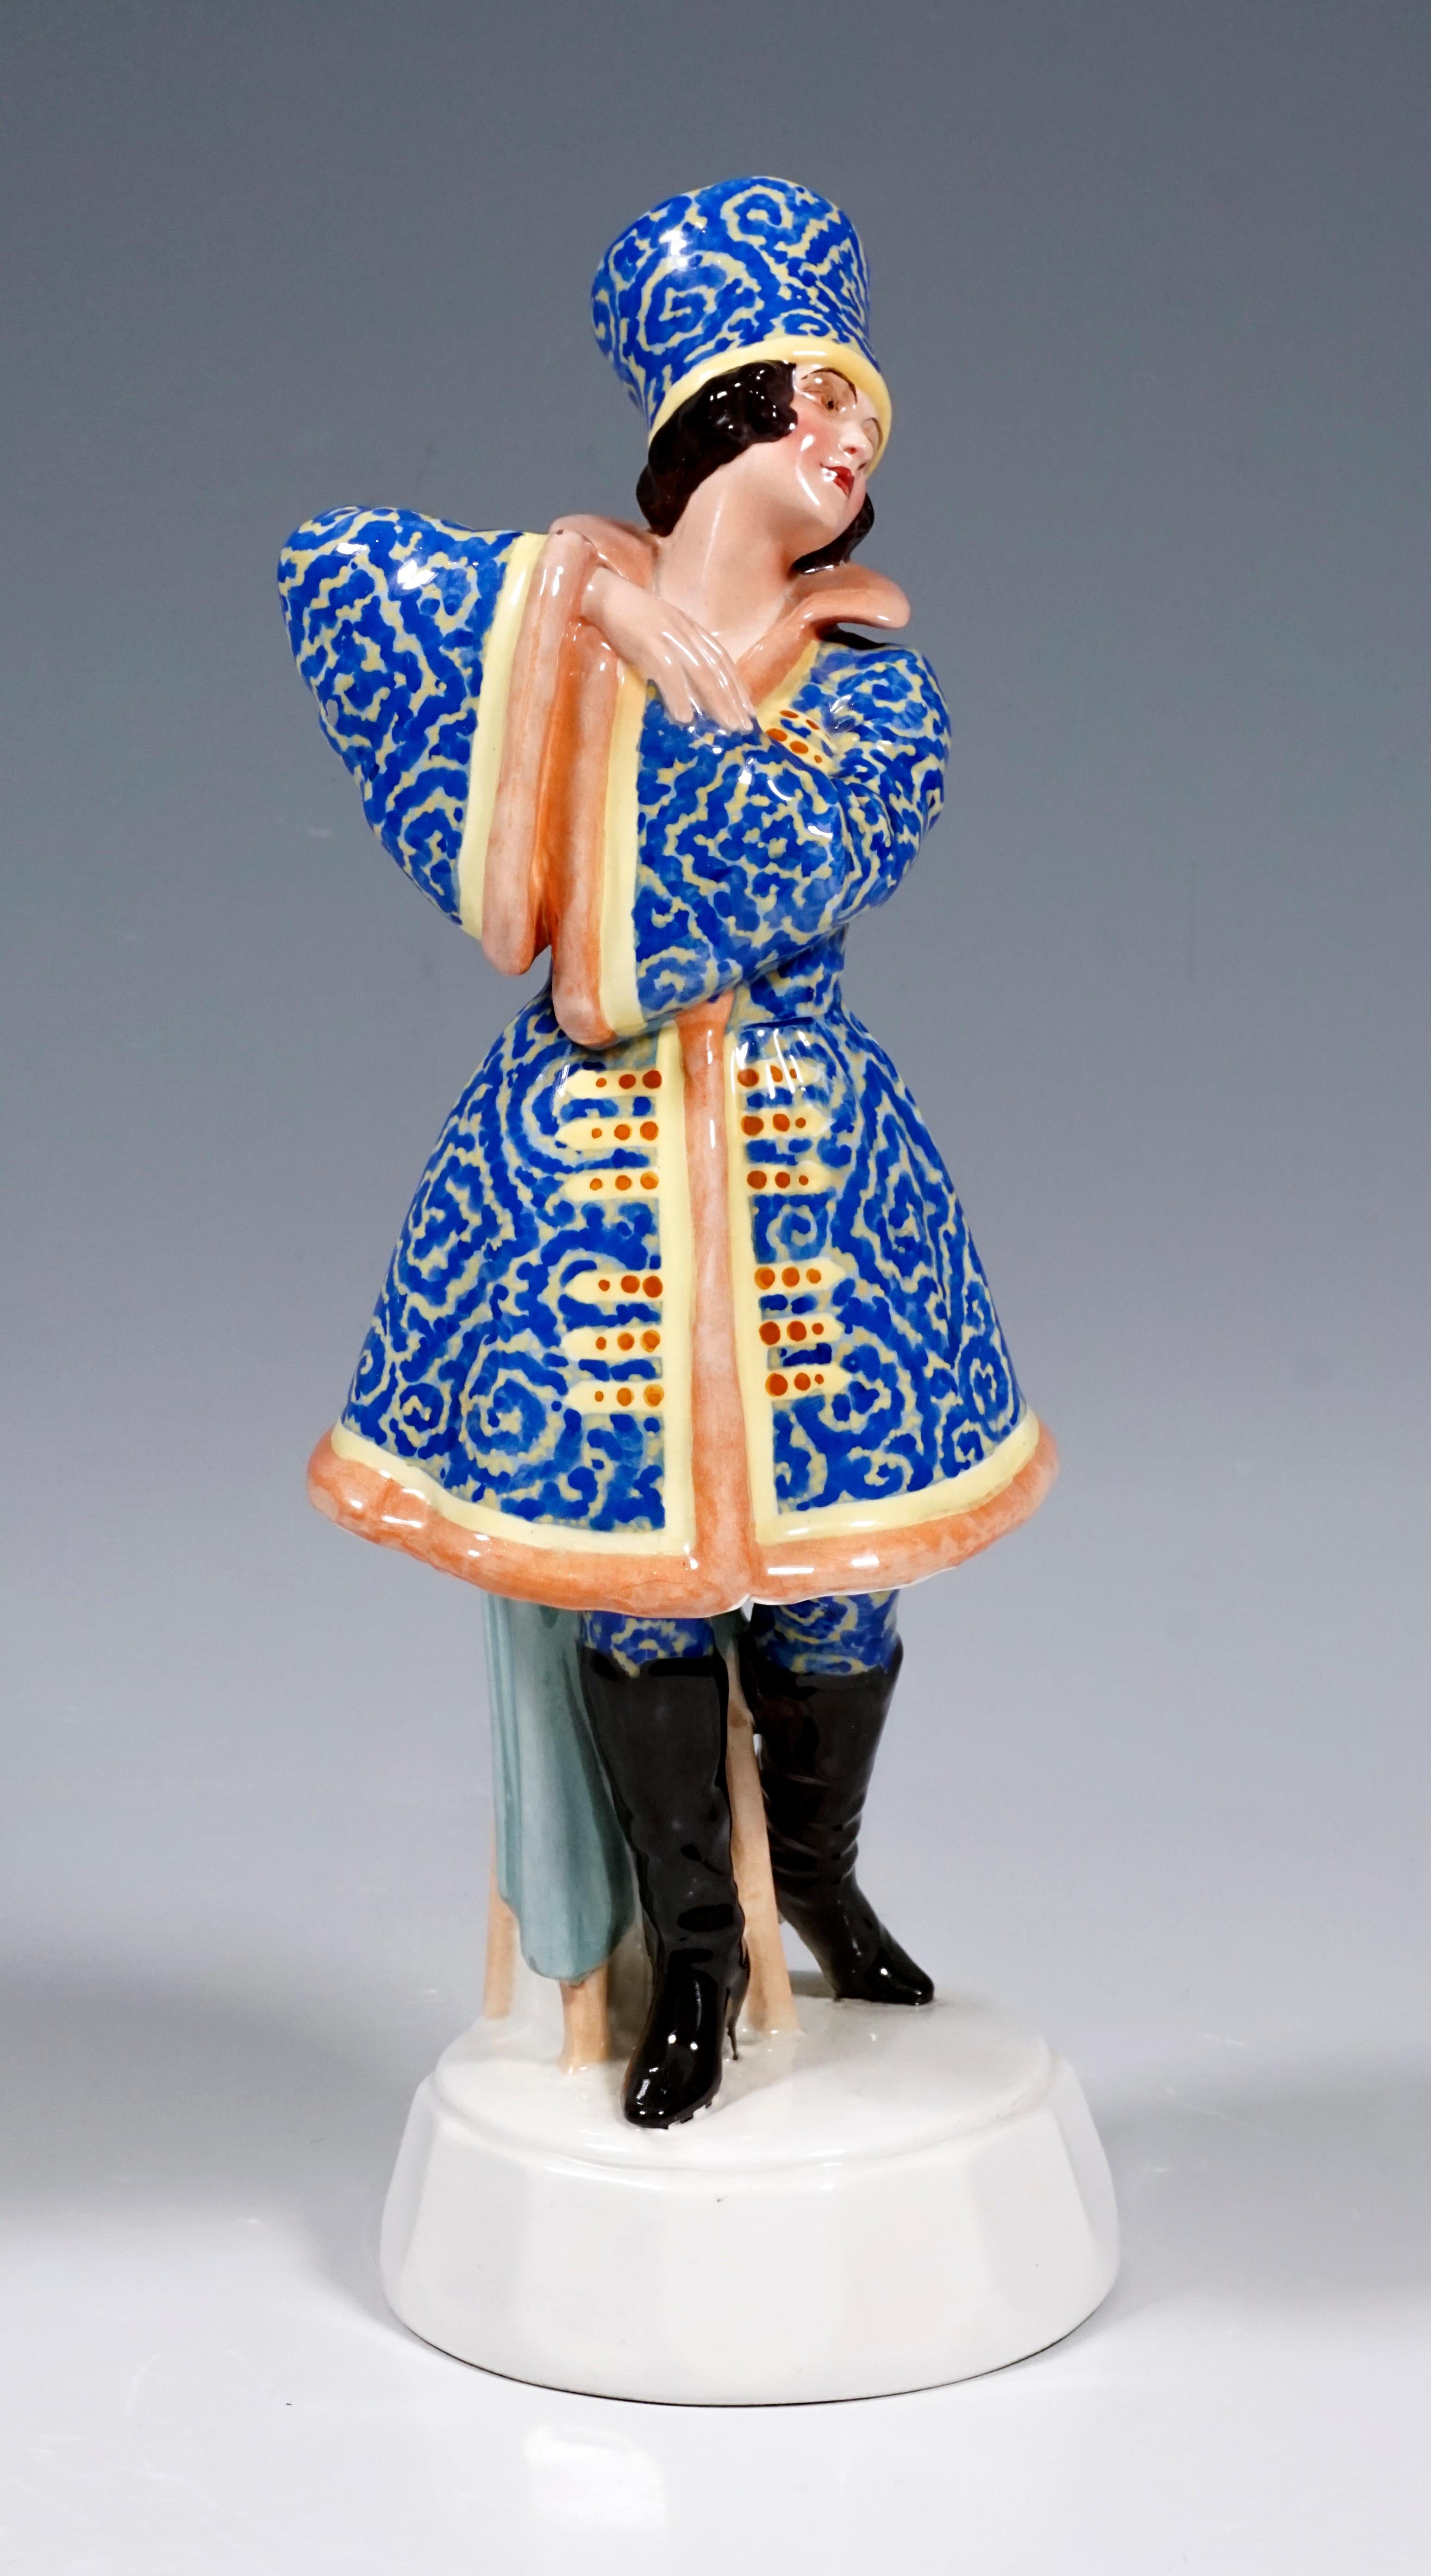 Very rare Goldscheider Vienna Figurine of the 1920s
A standing dancer looking to the side with arms crossed and raised in front of her is shown. The young lady wears a Russian costume, decorated with elaborate blue embroidery, with a high fur cap